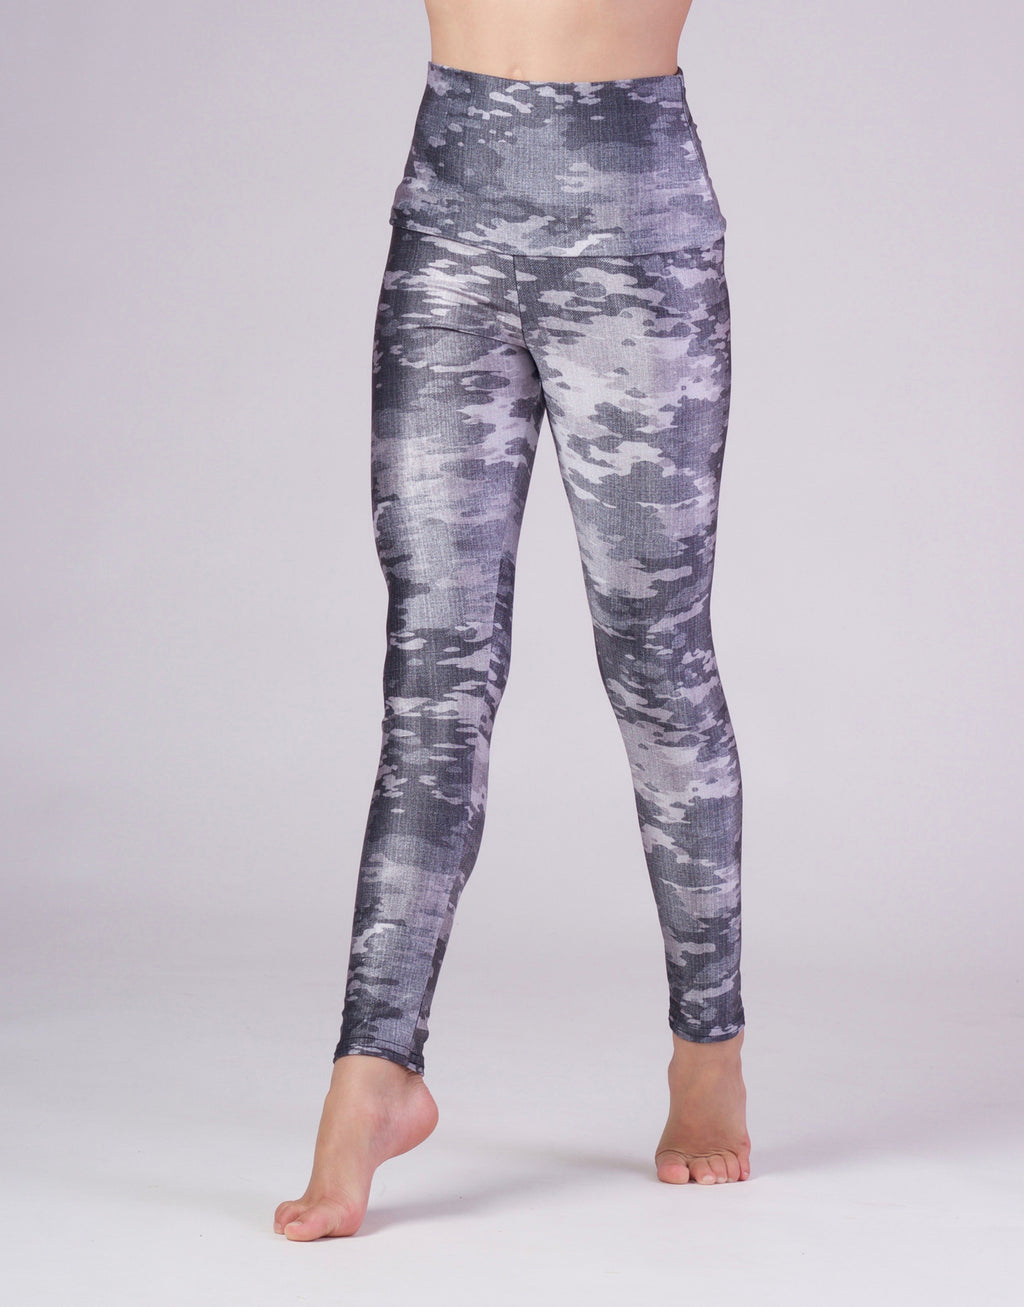 Shop High Waisted Leggings - Made in Canada and US – Sweat Society